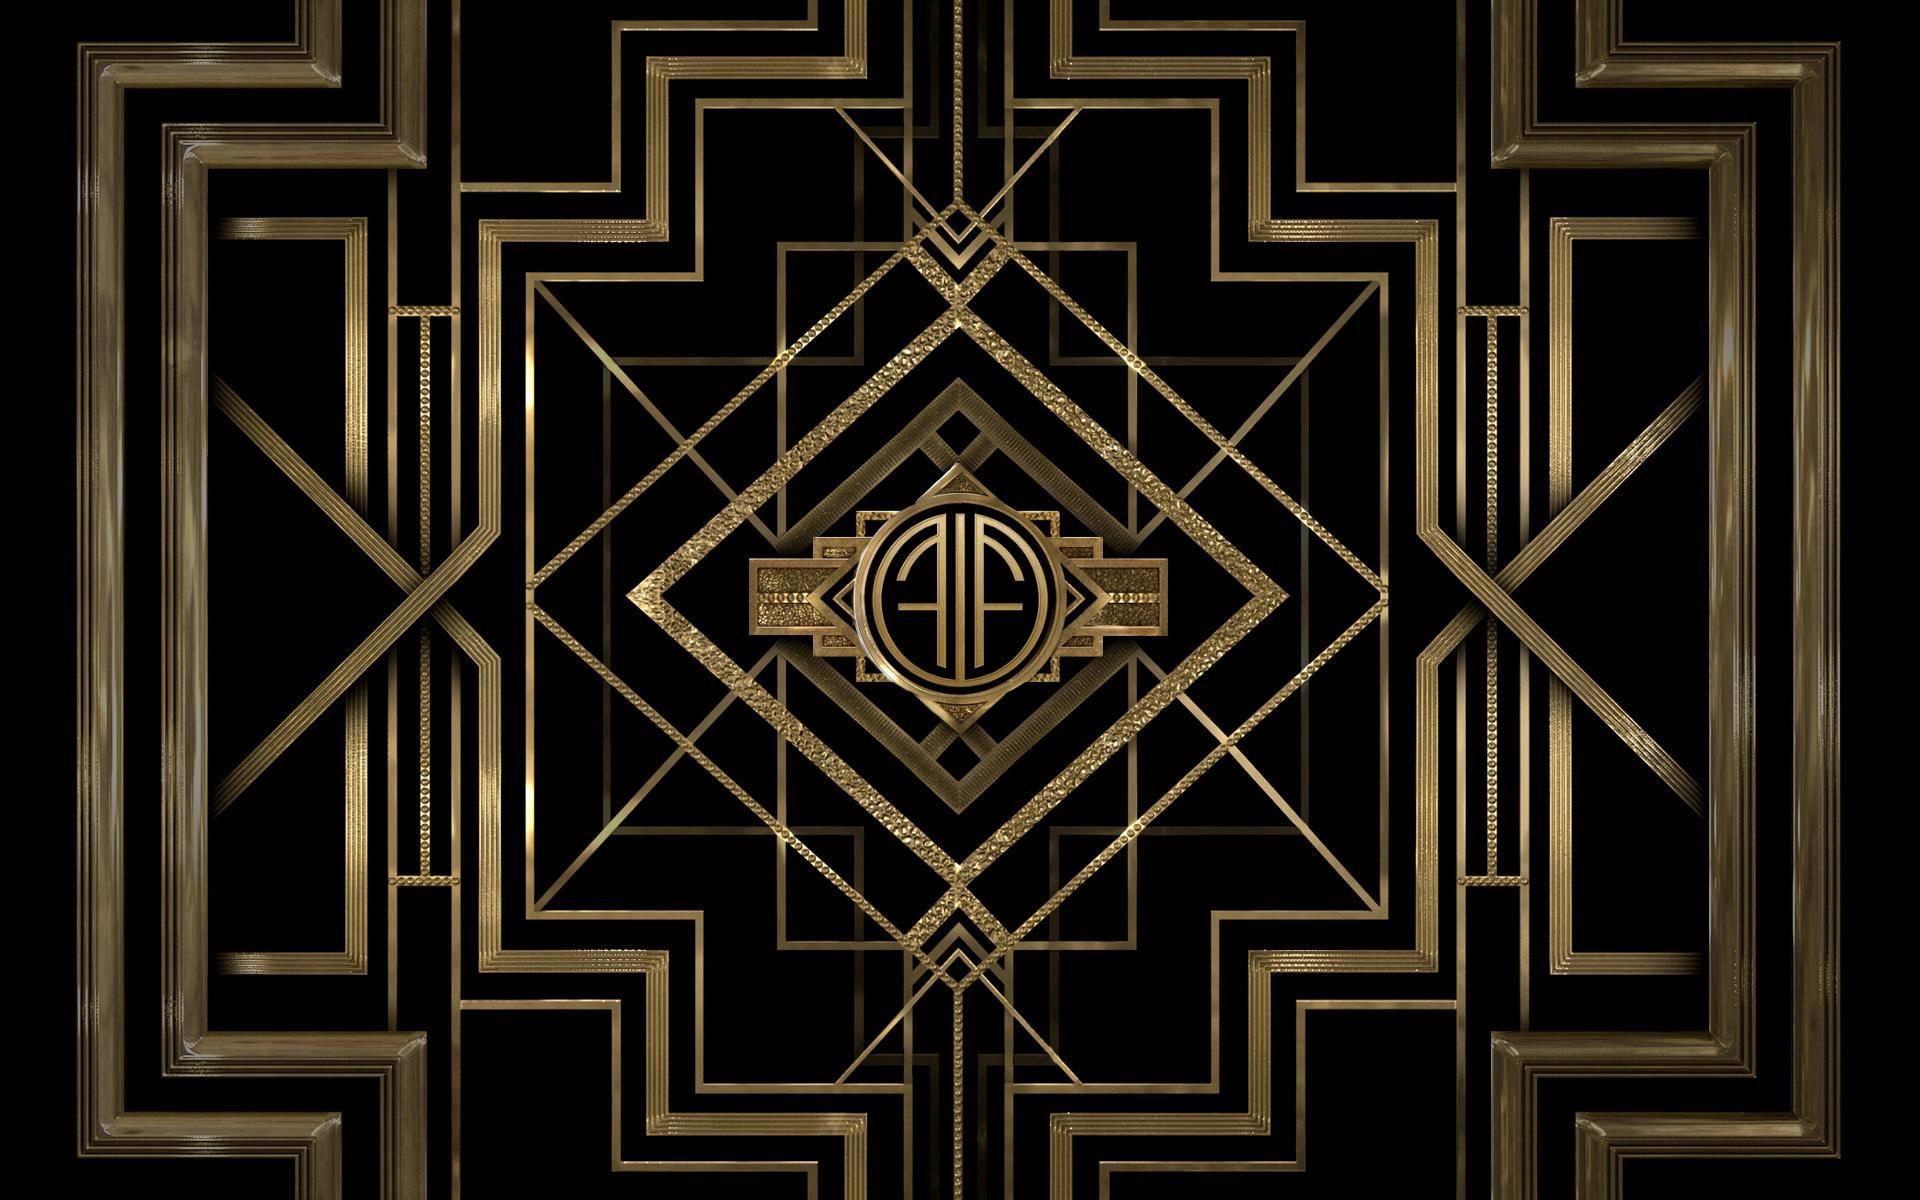 The Great Gatsby Wallpaper, 44 The Great Gatsby Image for Free